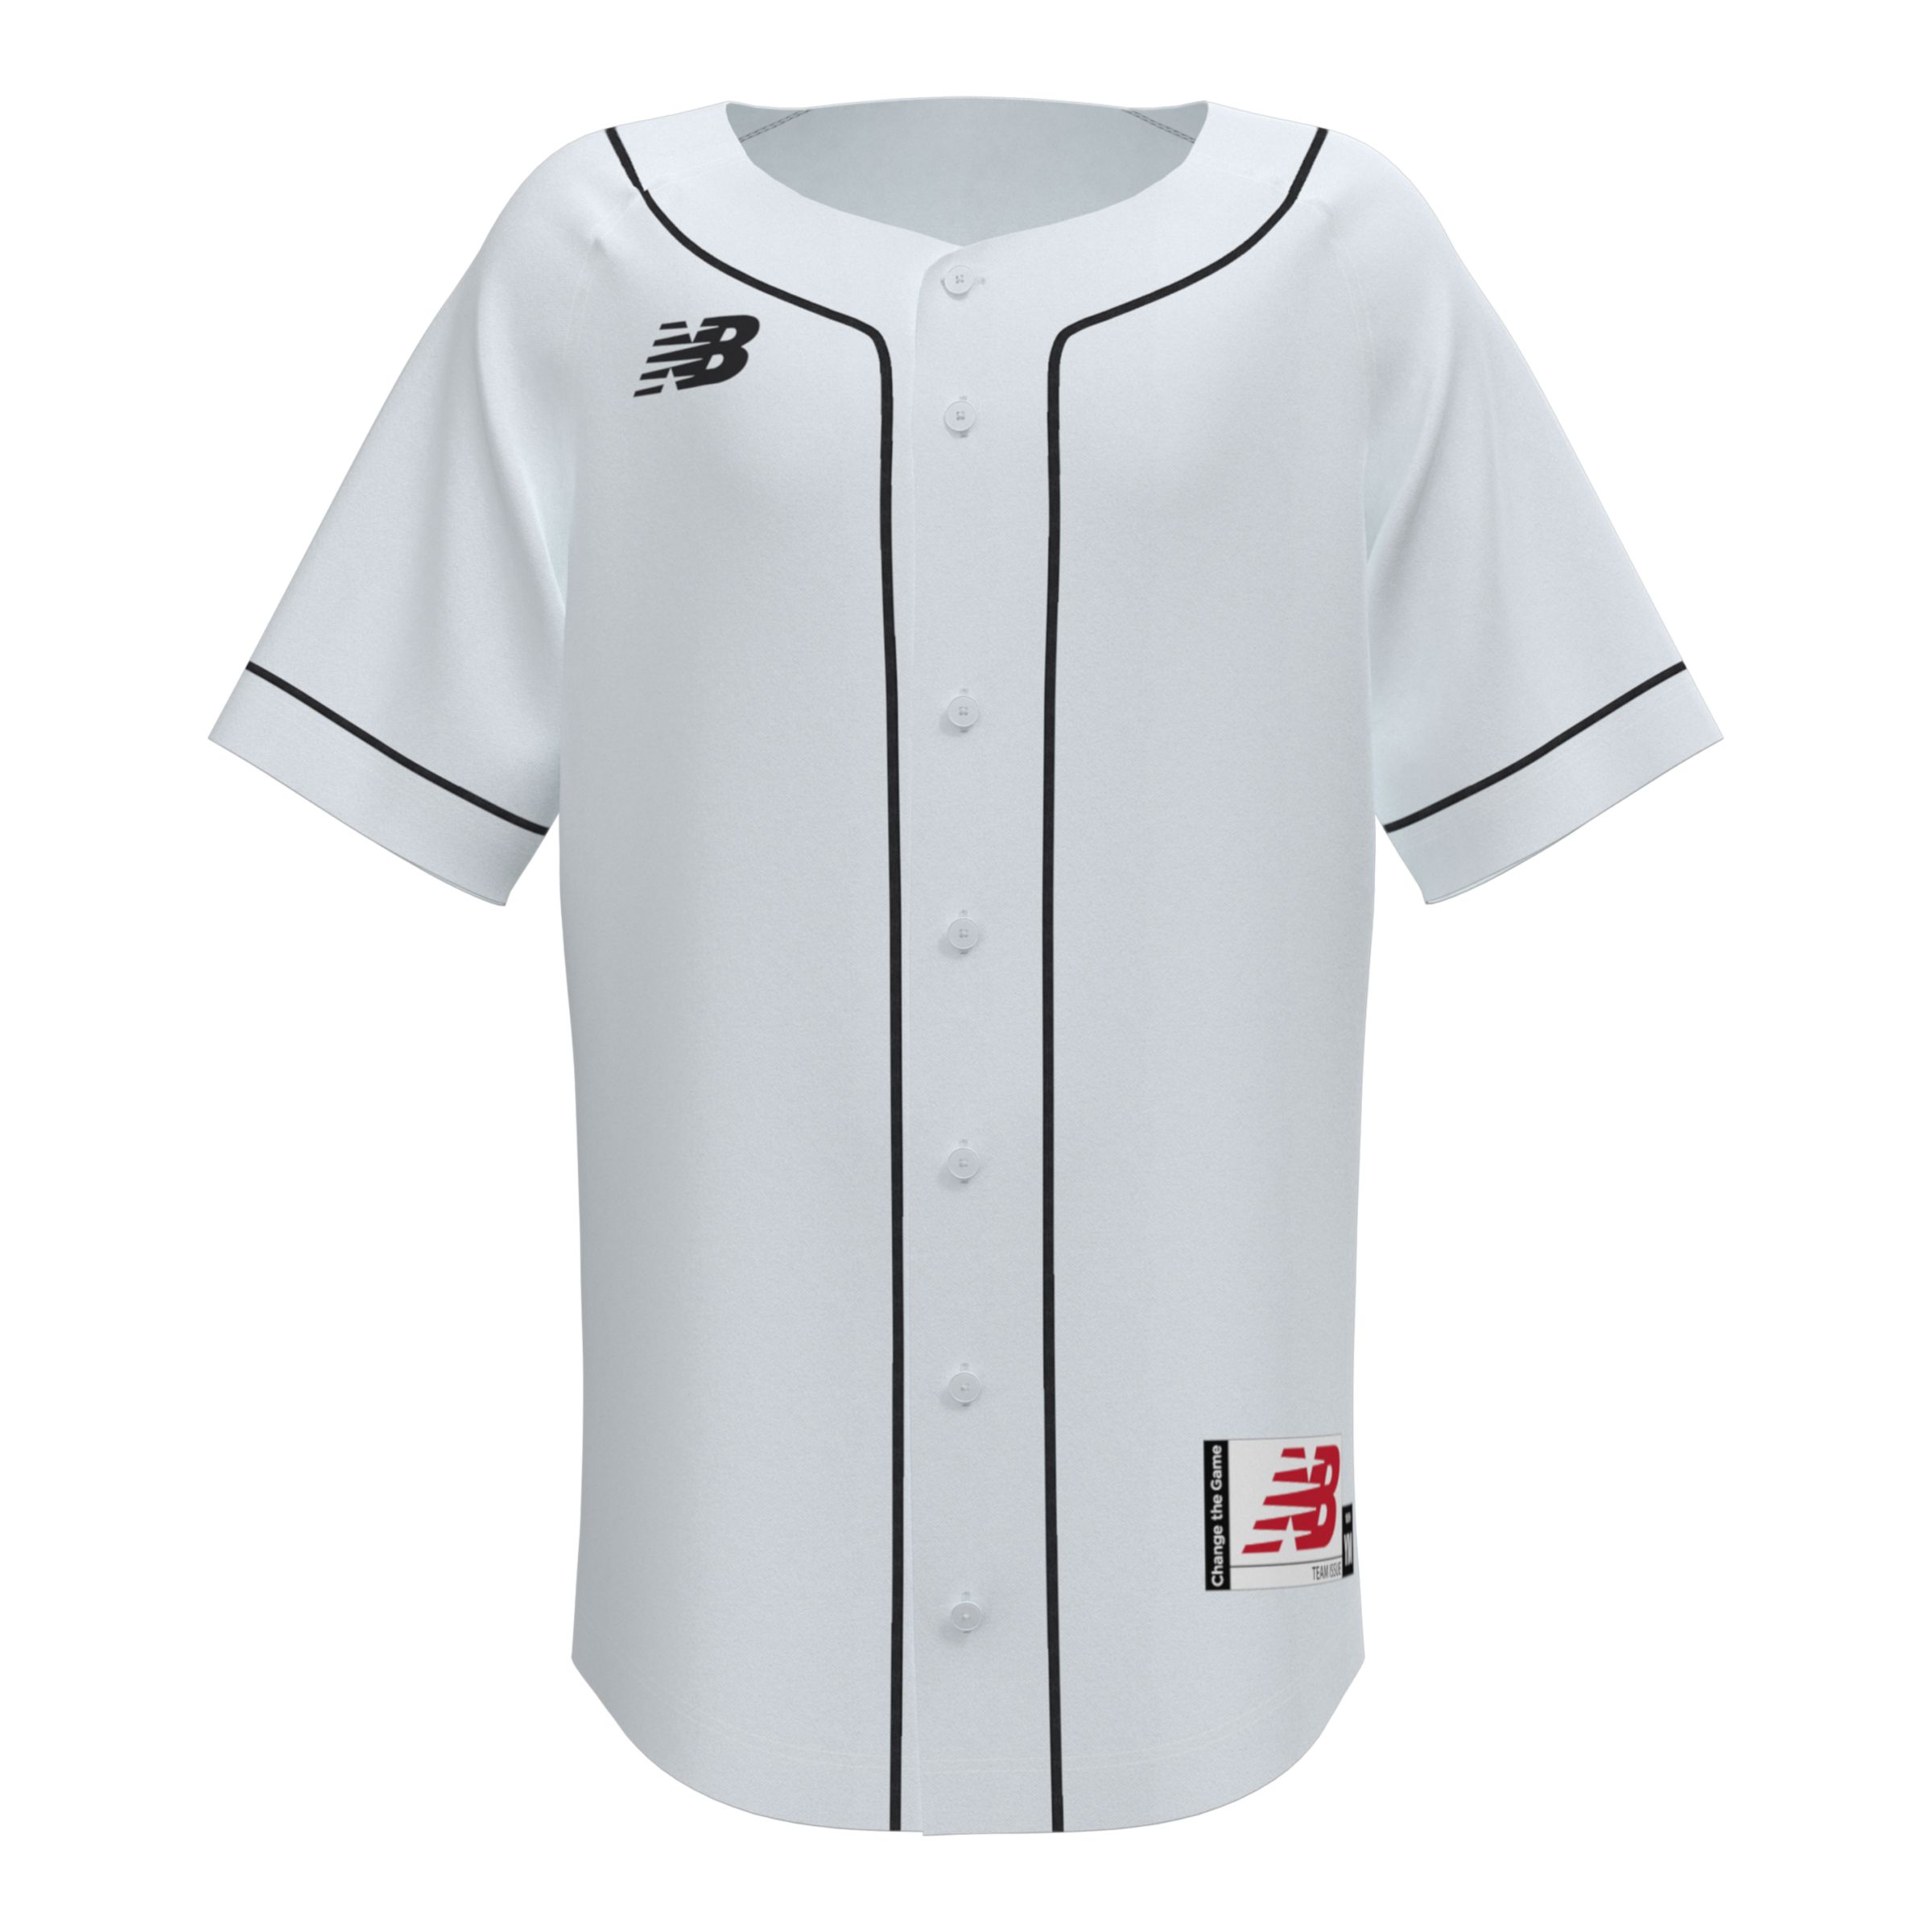 PRO SELECT Sublimated Full Button Jersey BLANK TEMPLATE